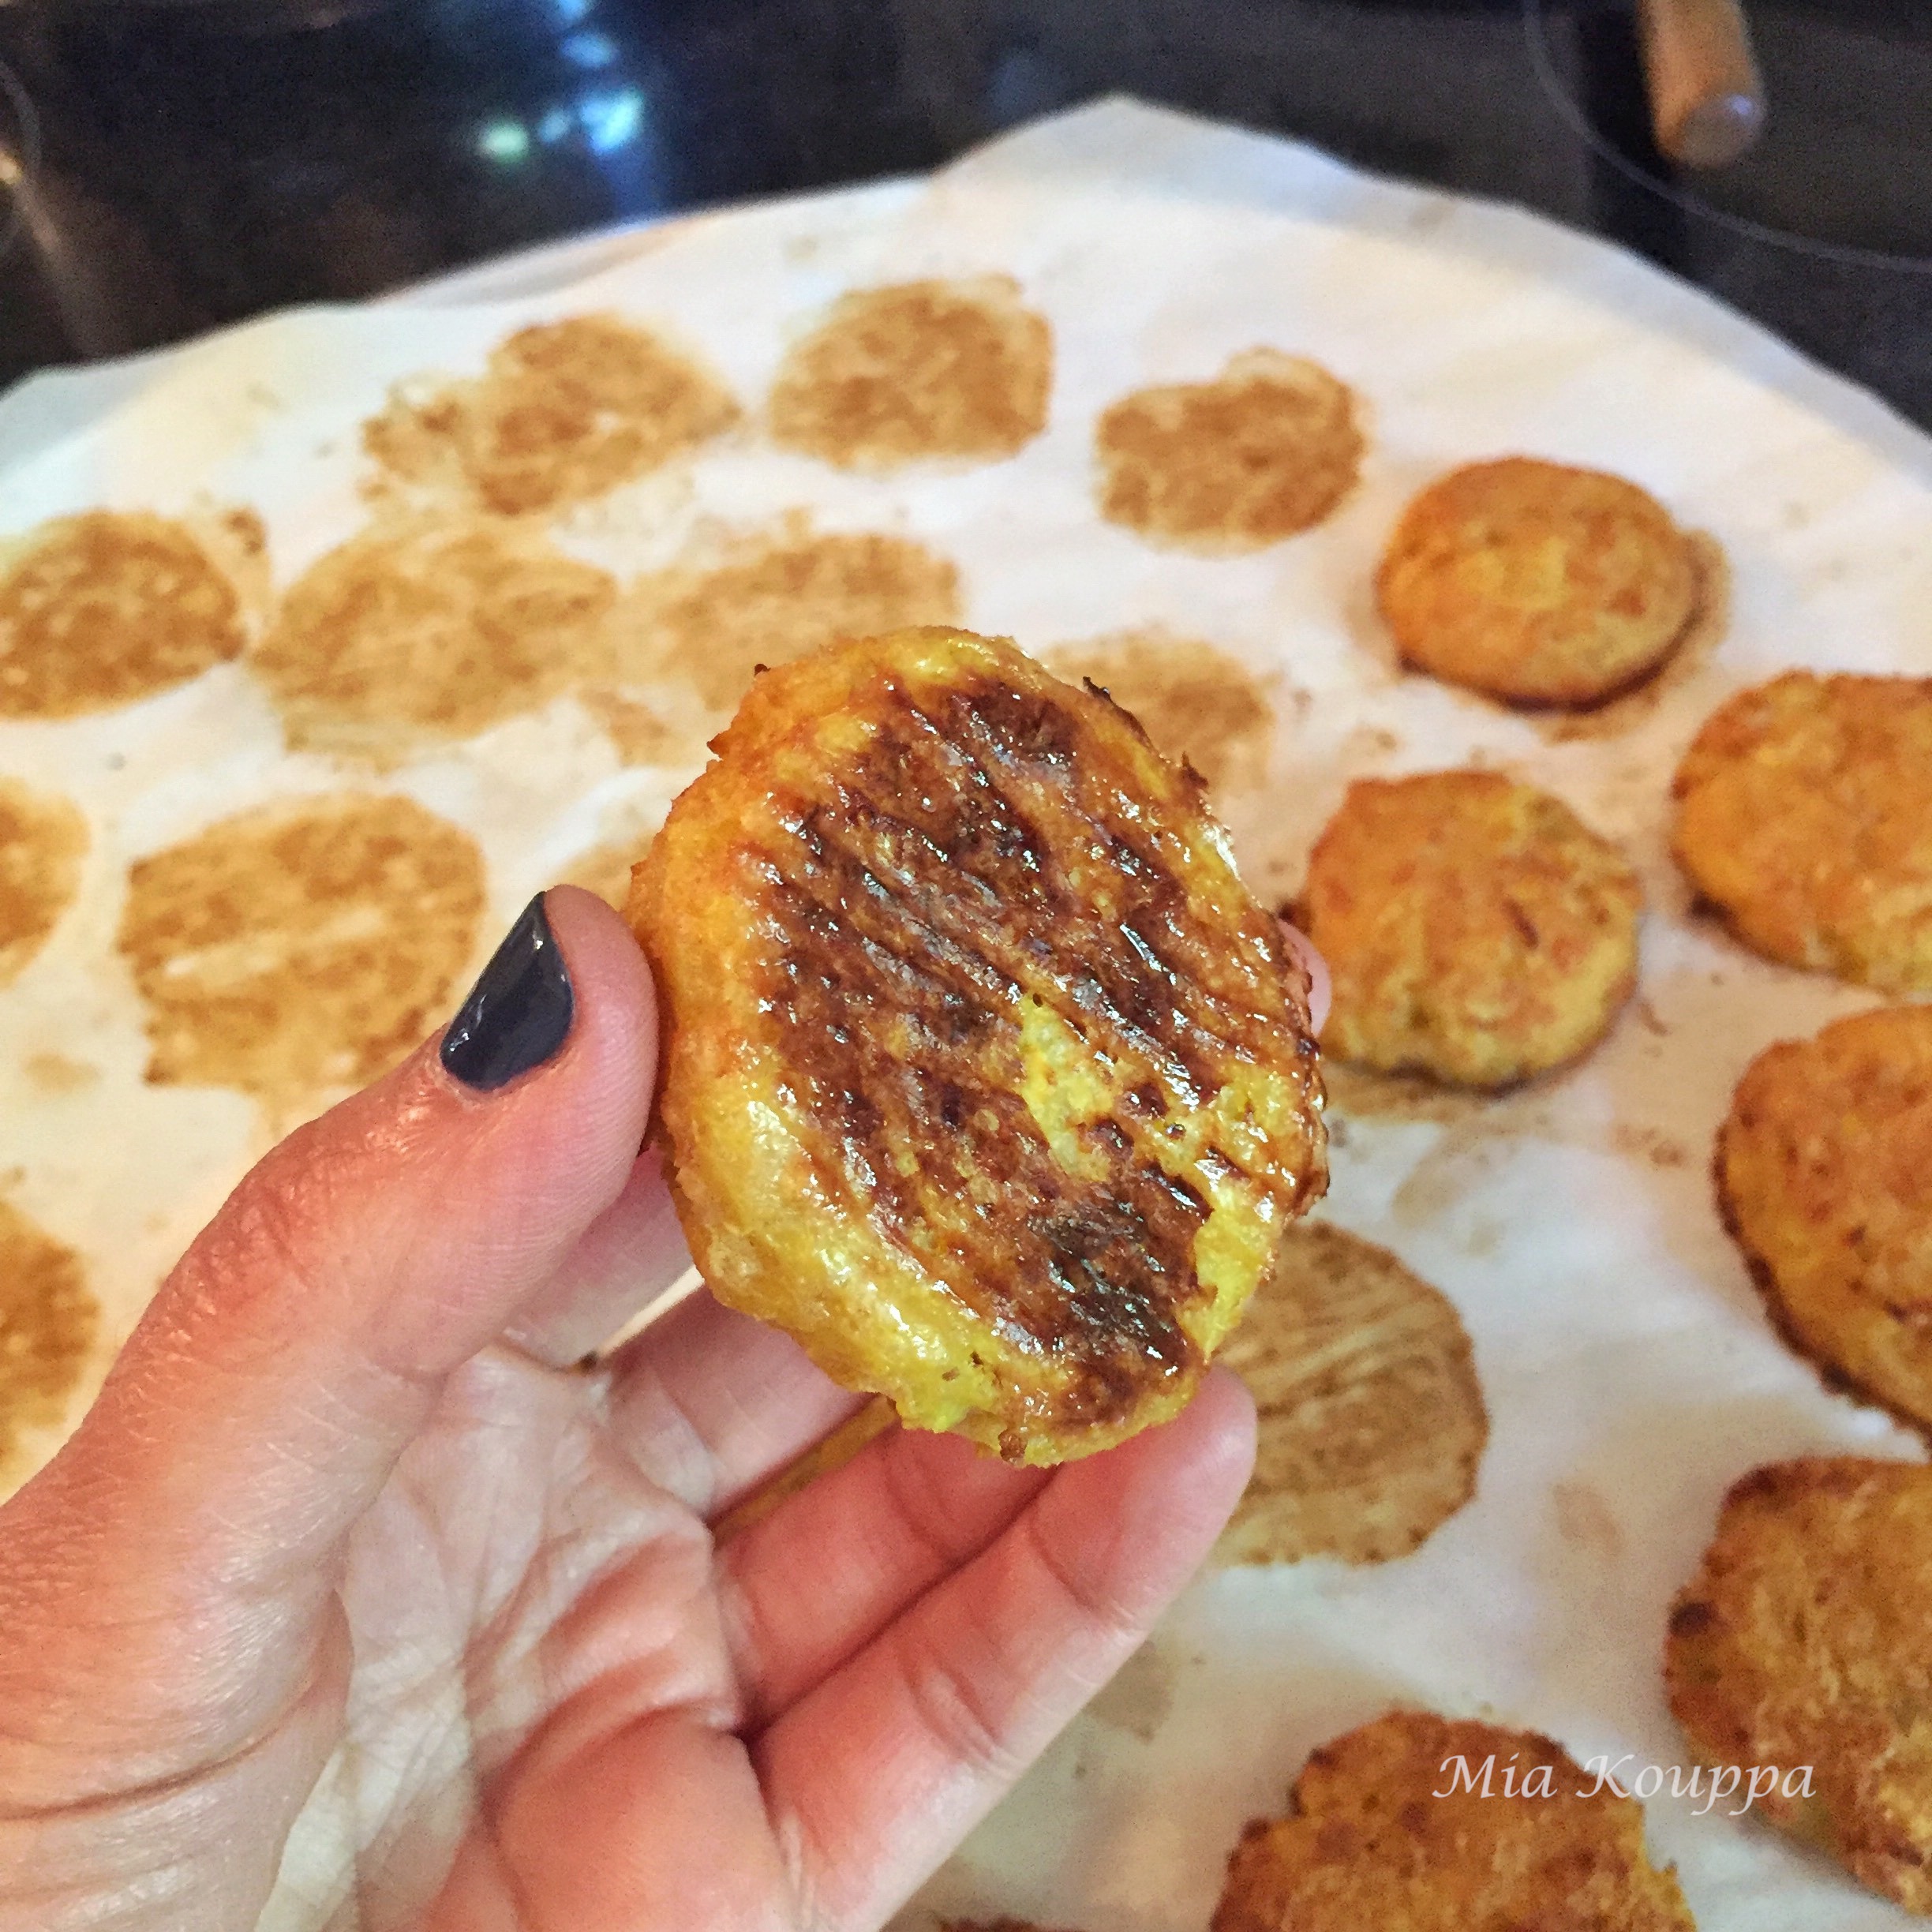 Baked squash fritters without cheese (Κολοκυθοκεφτέδες χωρίς τυρί)